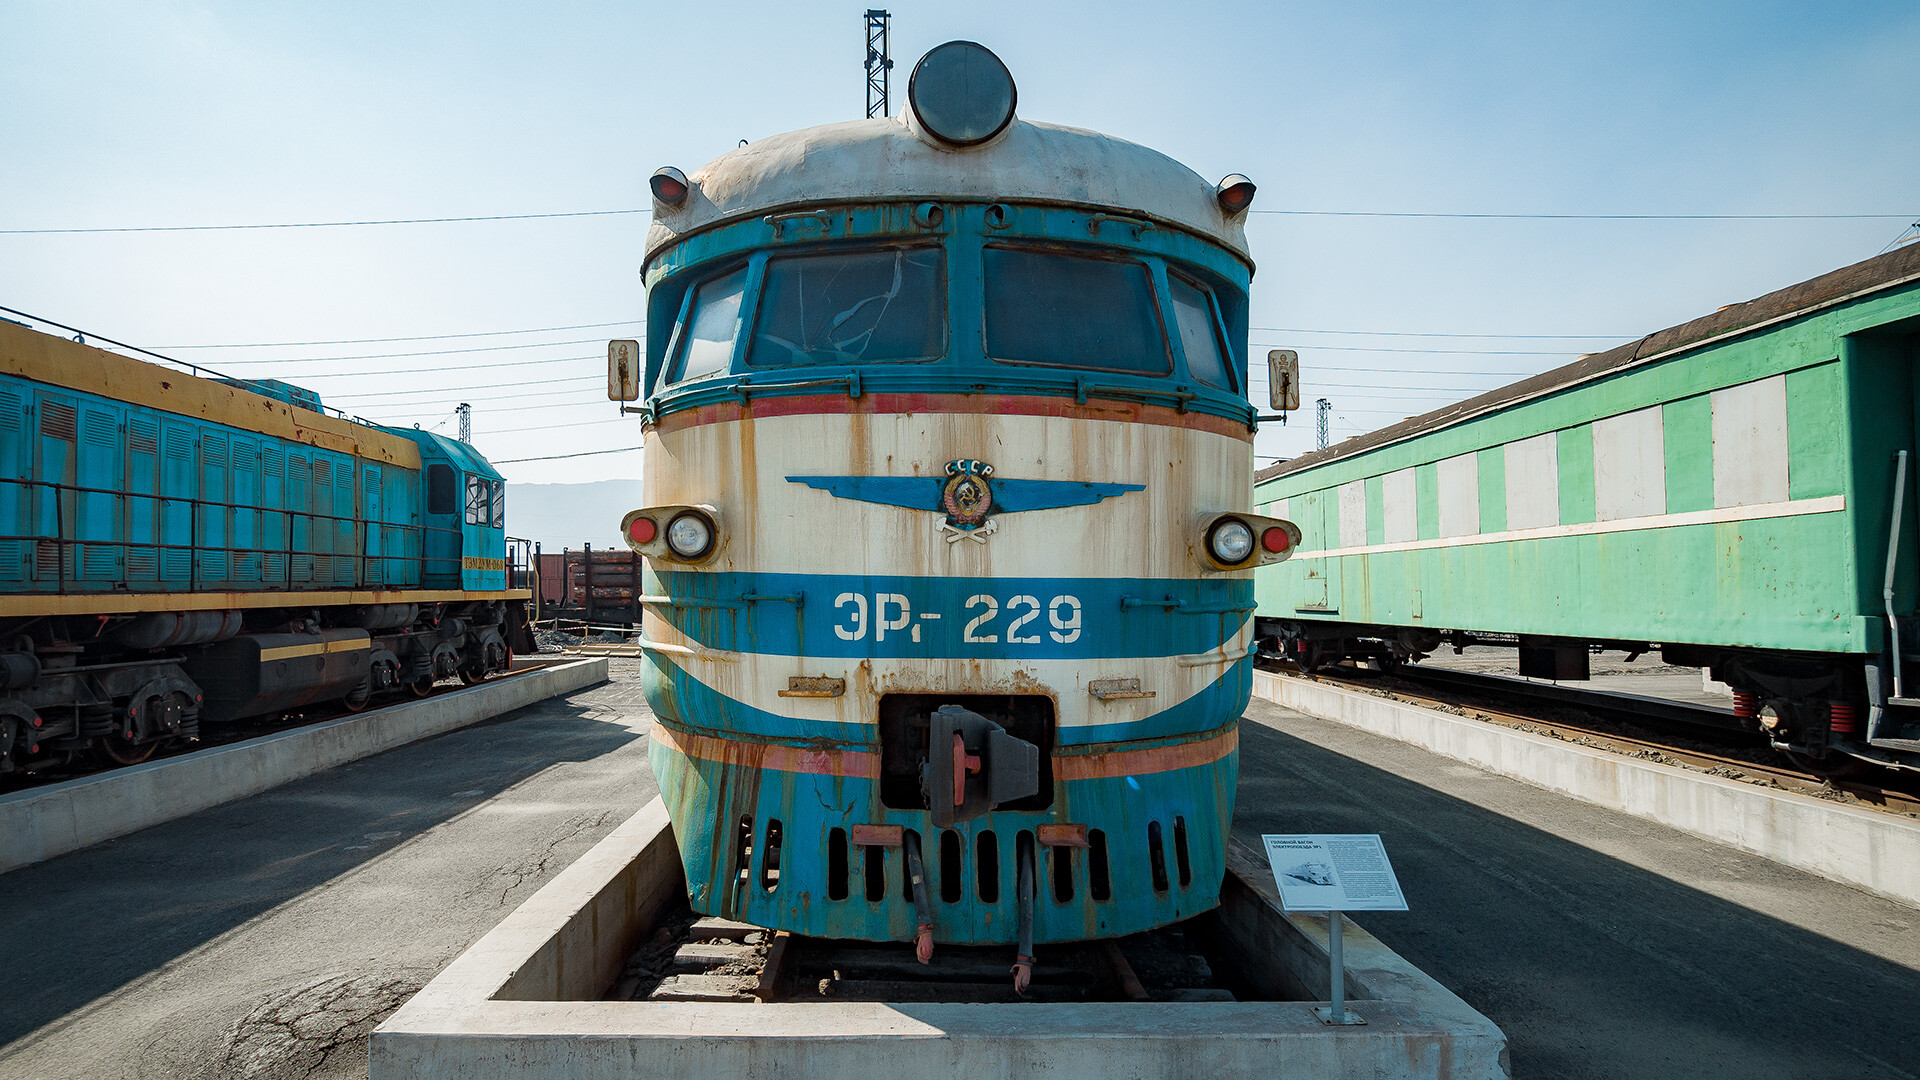 One of the Soviet commuter trains at the Norilsk railway station.